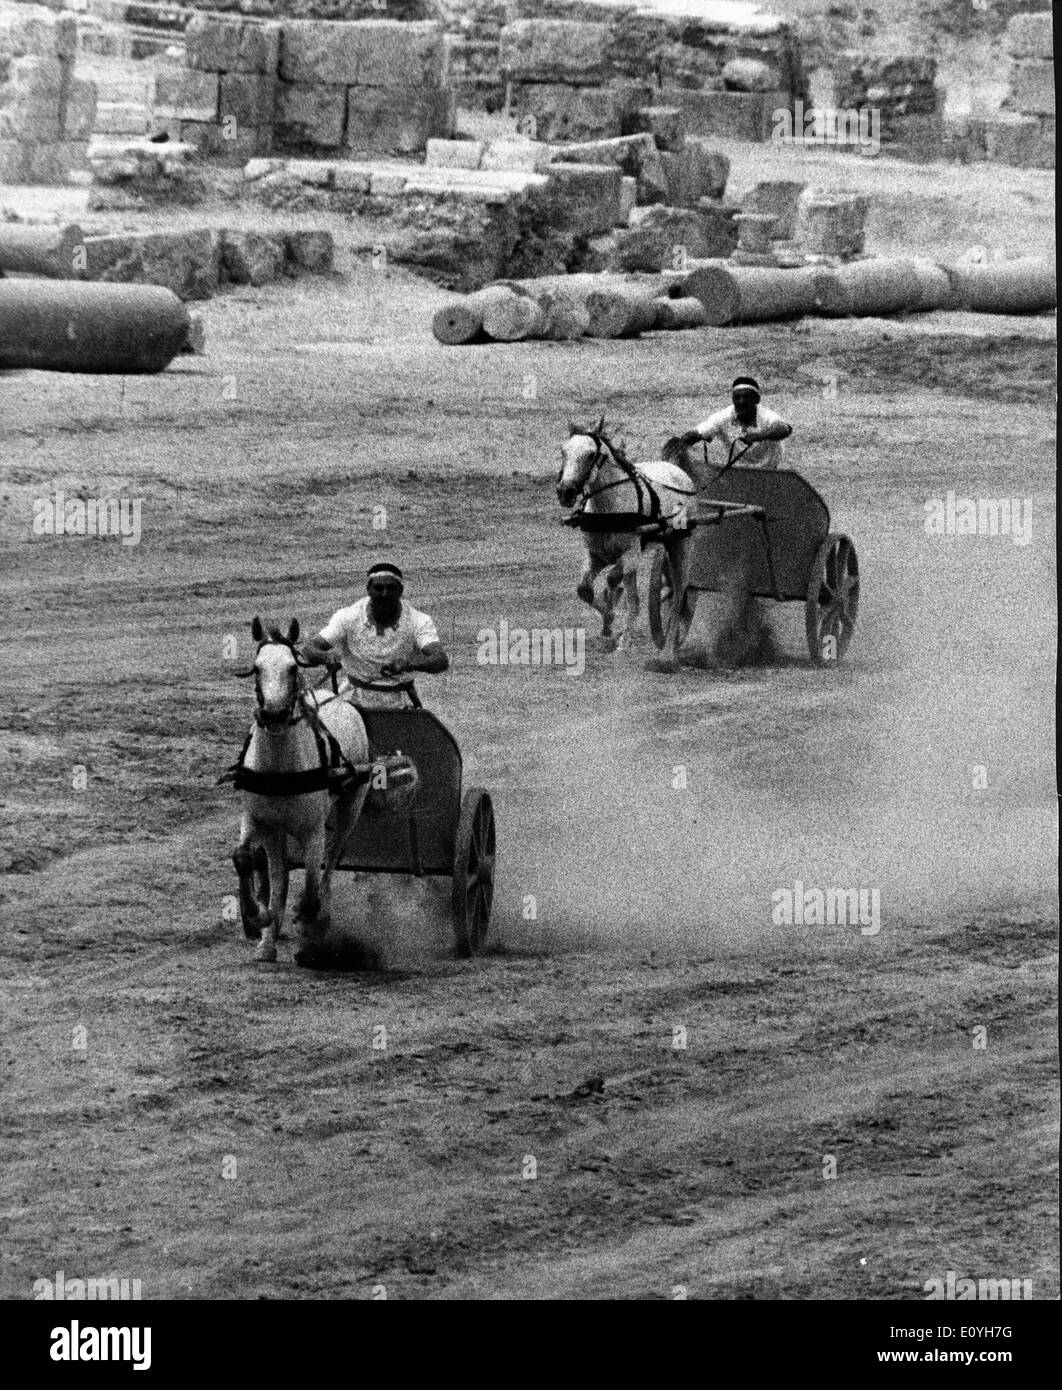 May 29, 1970; Tyre, Lebanon; Chariots race at the Roman Hippodrome at Tyre in Lebanon, seven chariots were competing on the 500-meter-long hairpin shapped course, that was built in the 2nd century A.D. Stock Photo